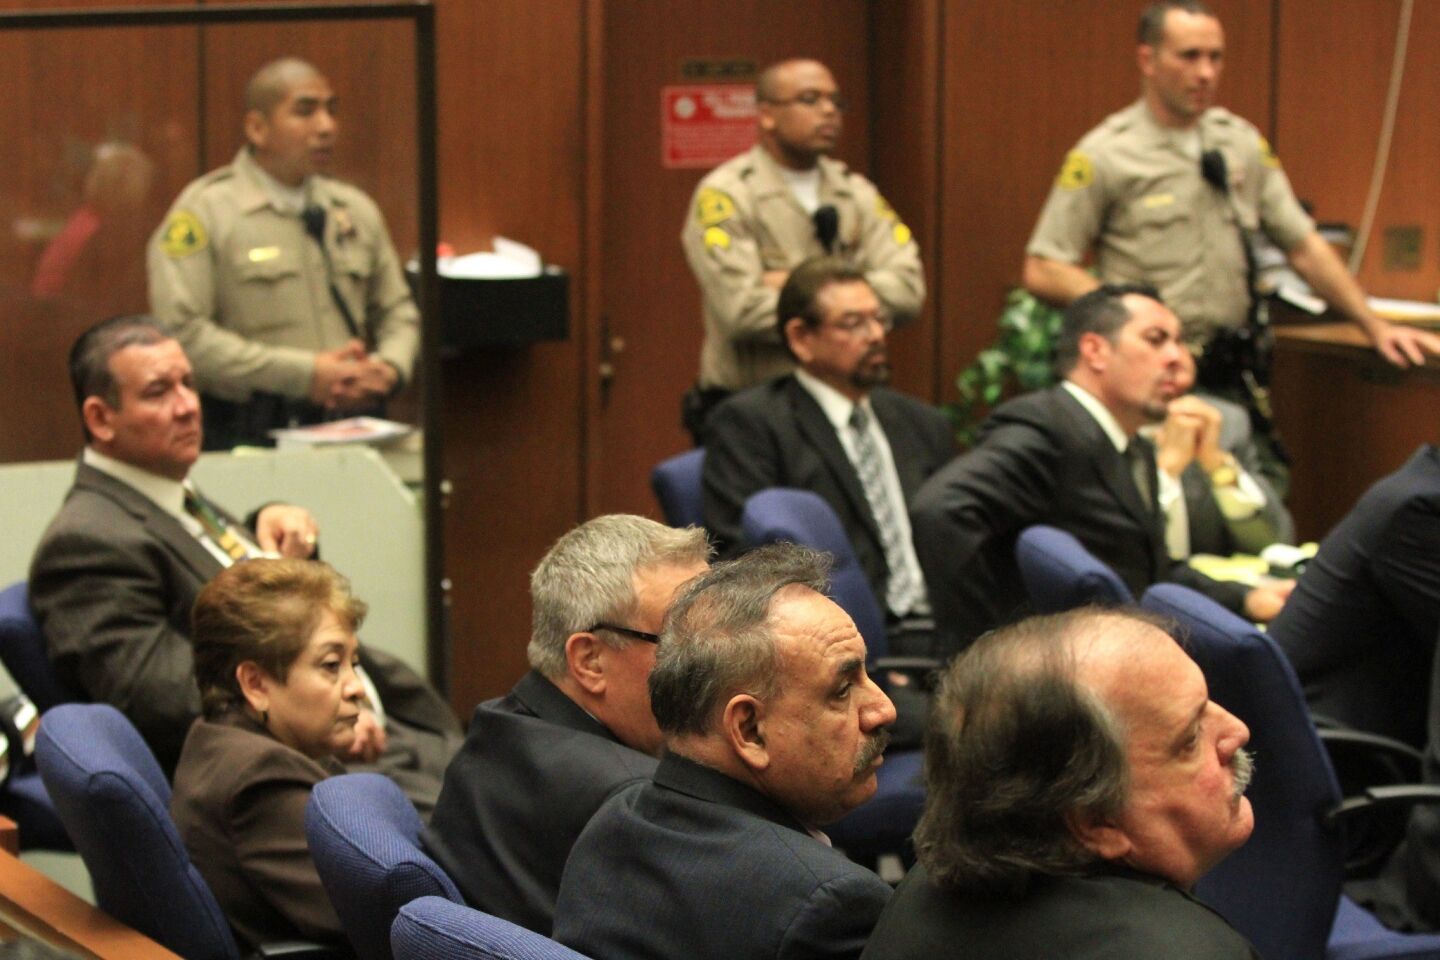 Five former Bell City Council members were found guilty March 20, 2013 of stealing public money by paying themselves extraordinary salaries in one of Los Angeles County's poorest cities. From lower right are Victor Bello, Oscar Hernandez, George Cole, Teresa Jacobo, Luis Artiga and George Mirabal. Luis Artiga, the only one of the six defendants who was acquitted on all charges, was released by the judge.